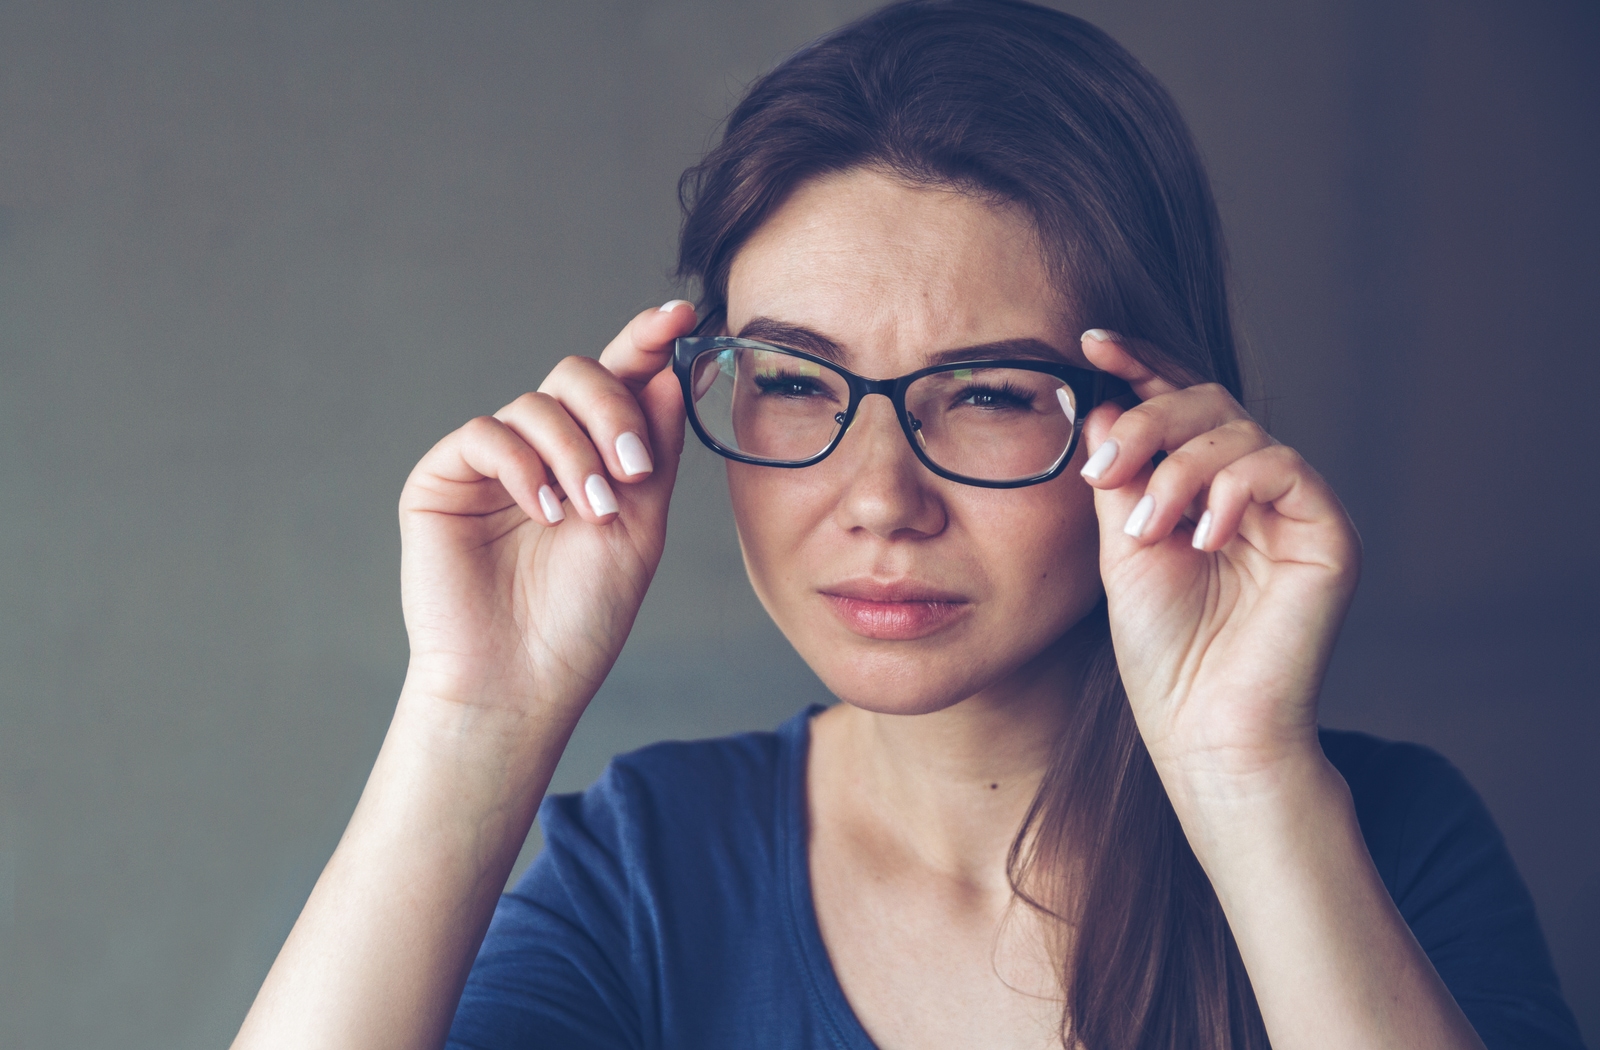 A woman with astigmatism squinting and holding onto her glasses